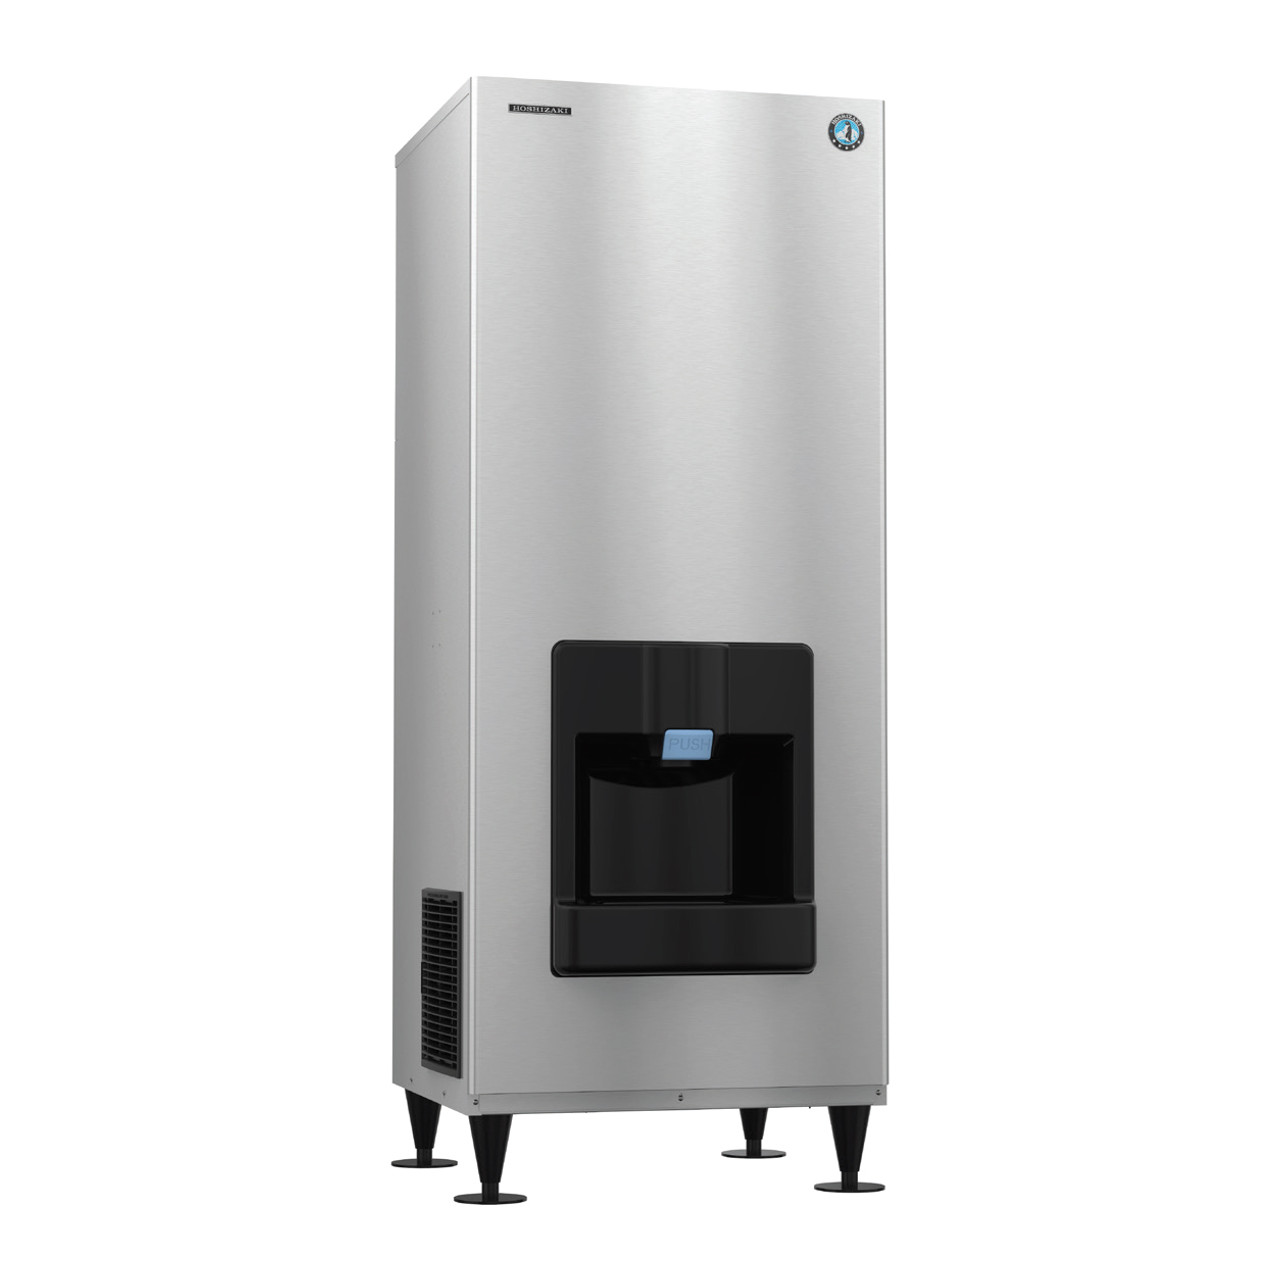 Hoshizaki DKM-500BWJ 30" Water Cooled Serenity Ice and Water Dispenser - 200lb Storage / 545 Lb. Production